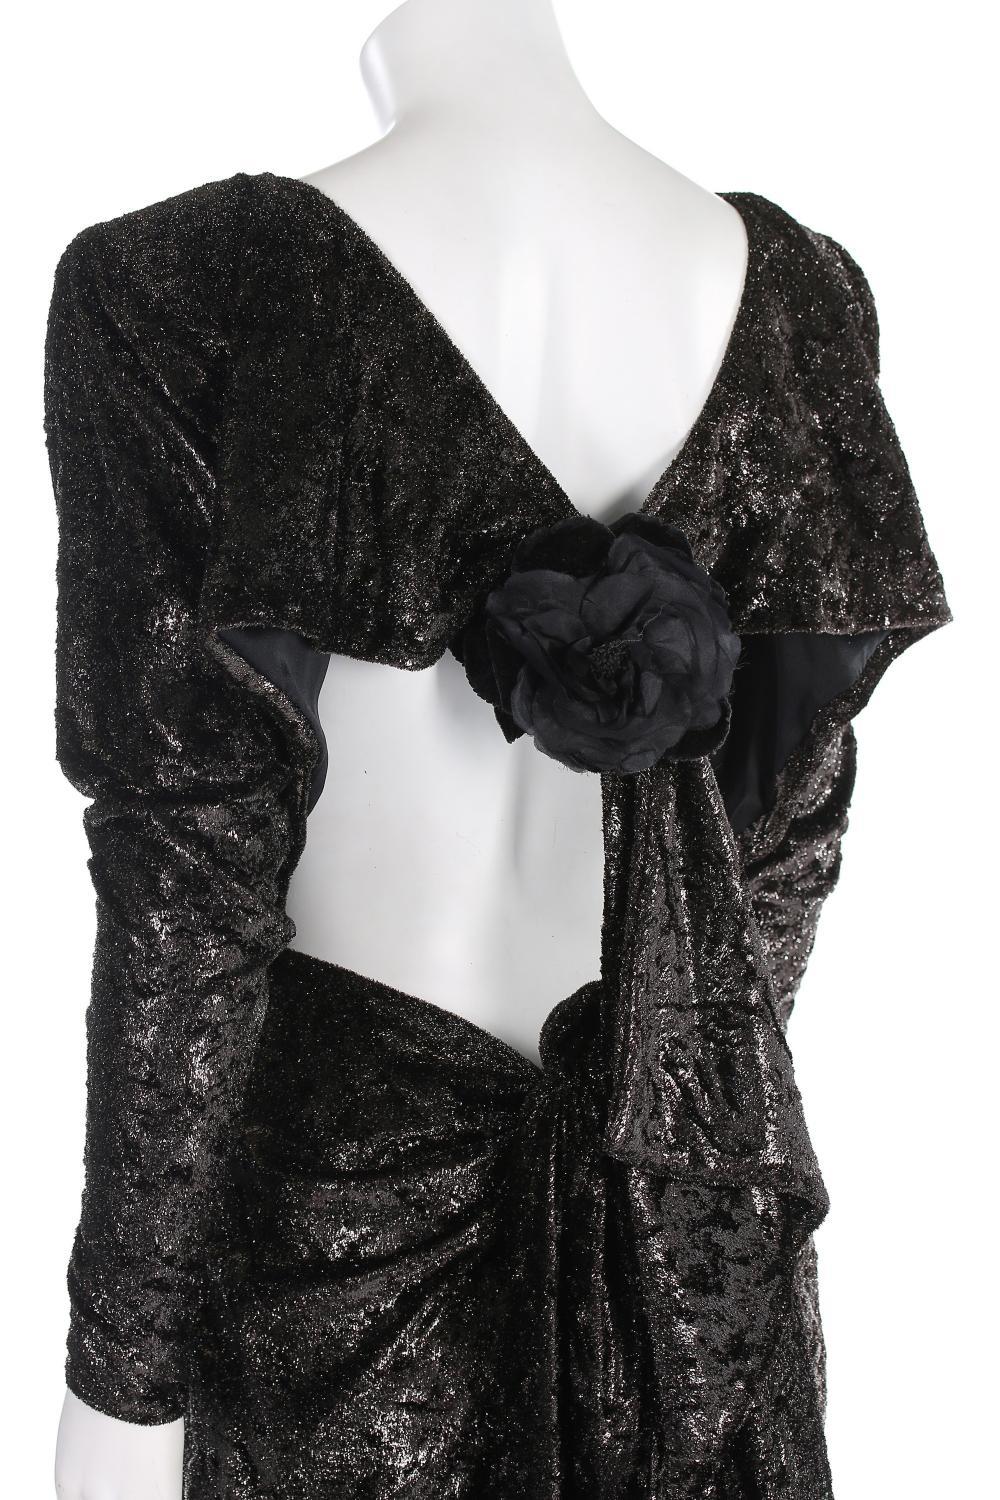 Black Rare 2 in 1 Yves Saint Laurent Couture Crushed Velvet Numbered Dress c. 1986 For Sale